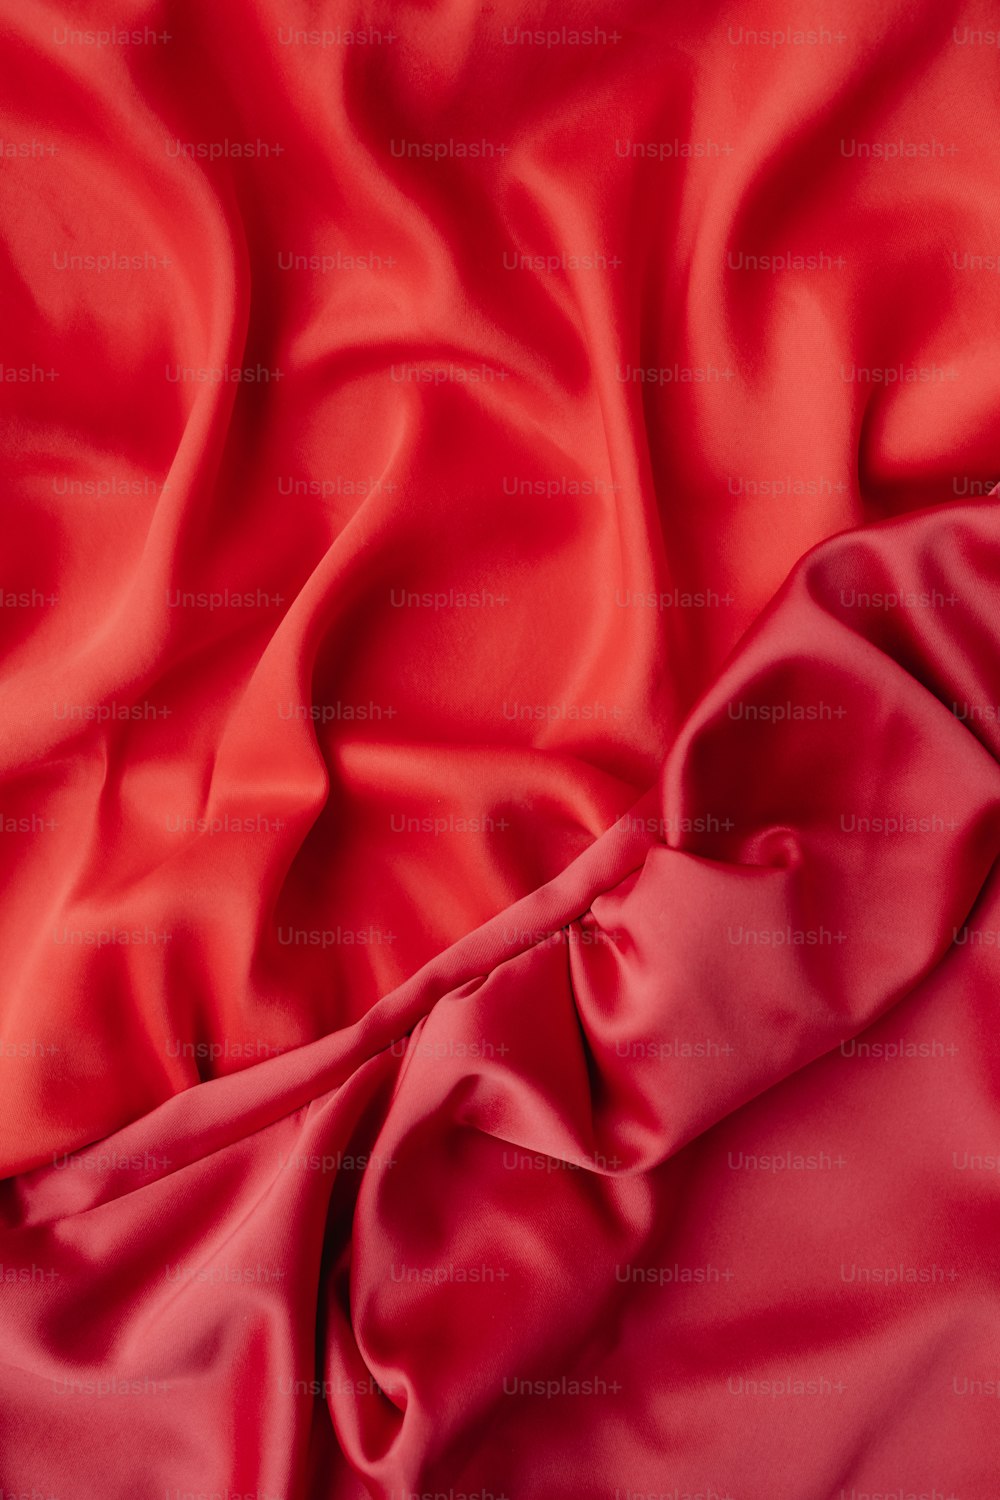 Red cloth - Free Stock Photo by Alen on